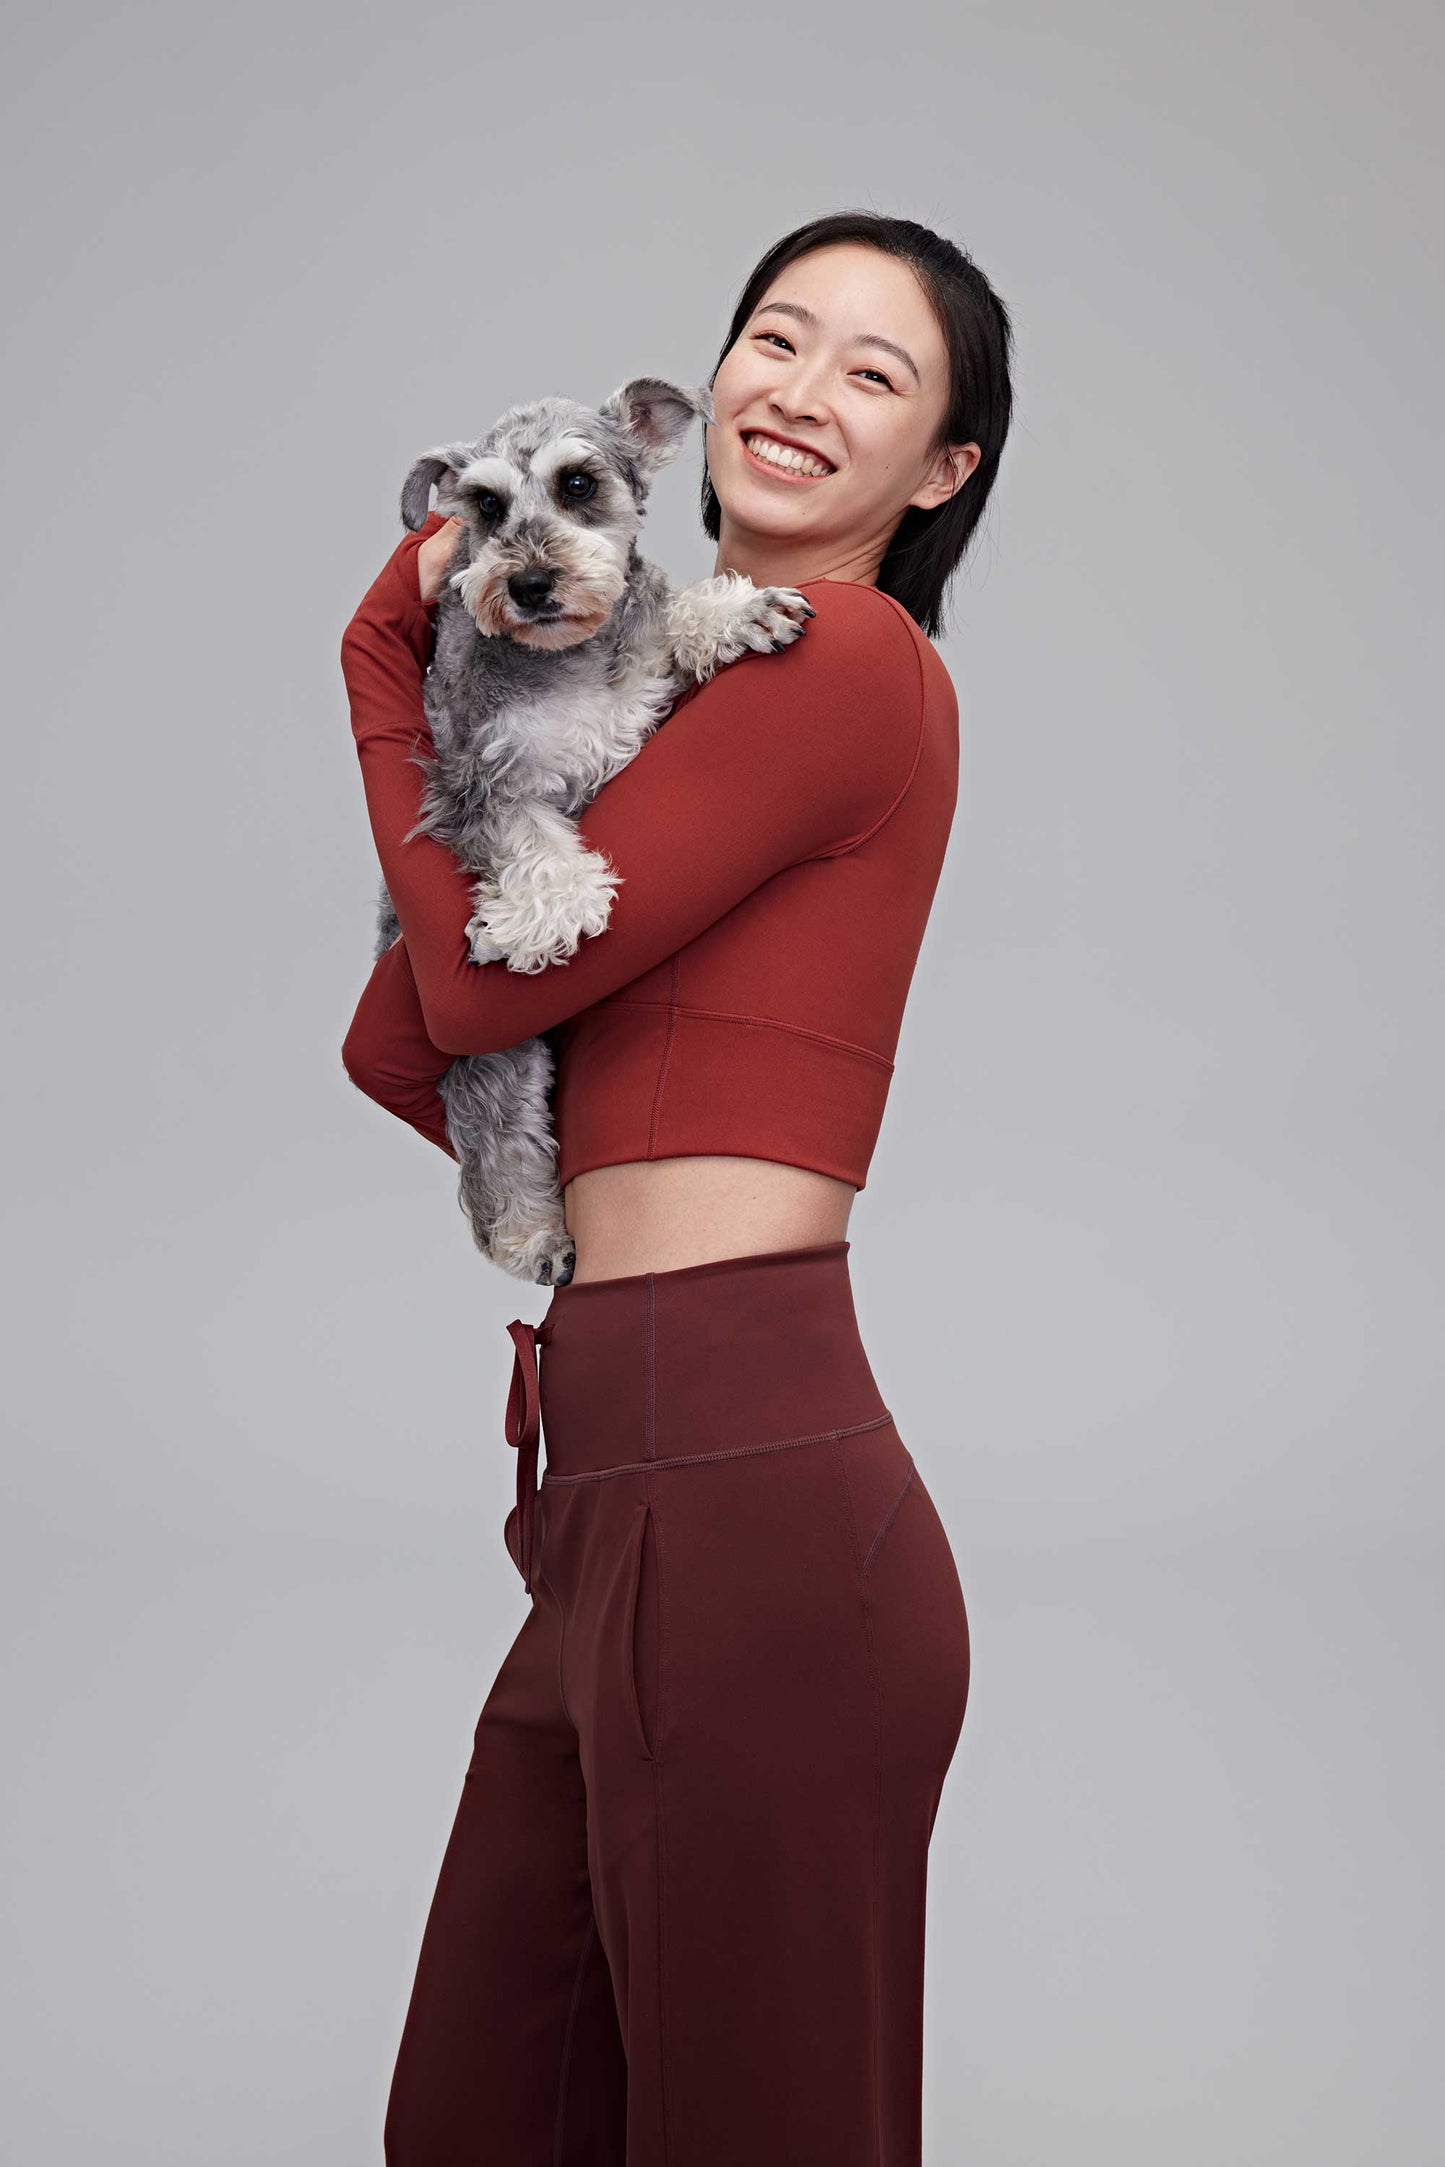 A woman wearing a red top and holding a dog